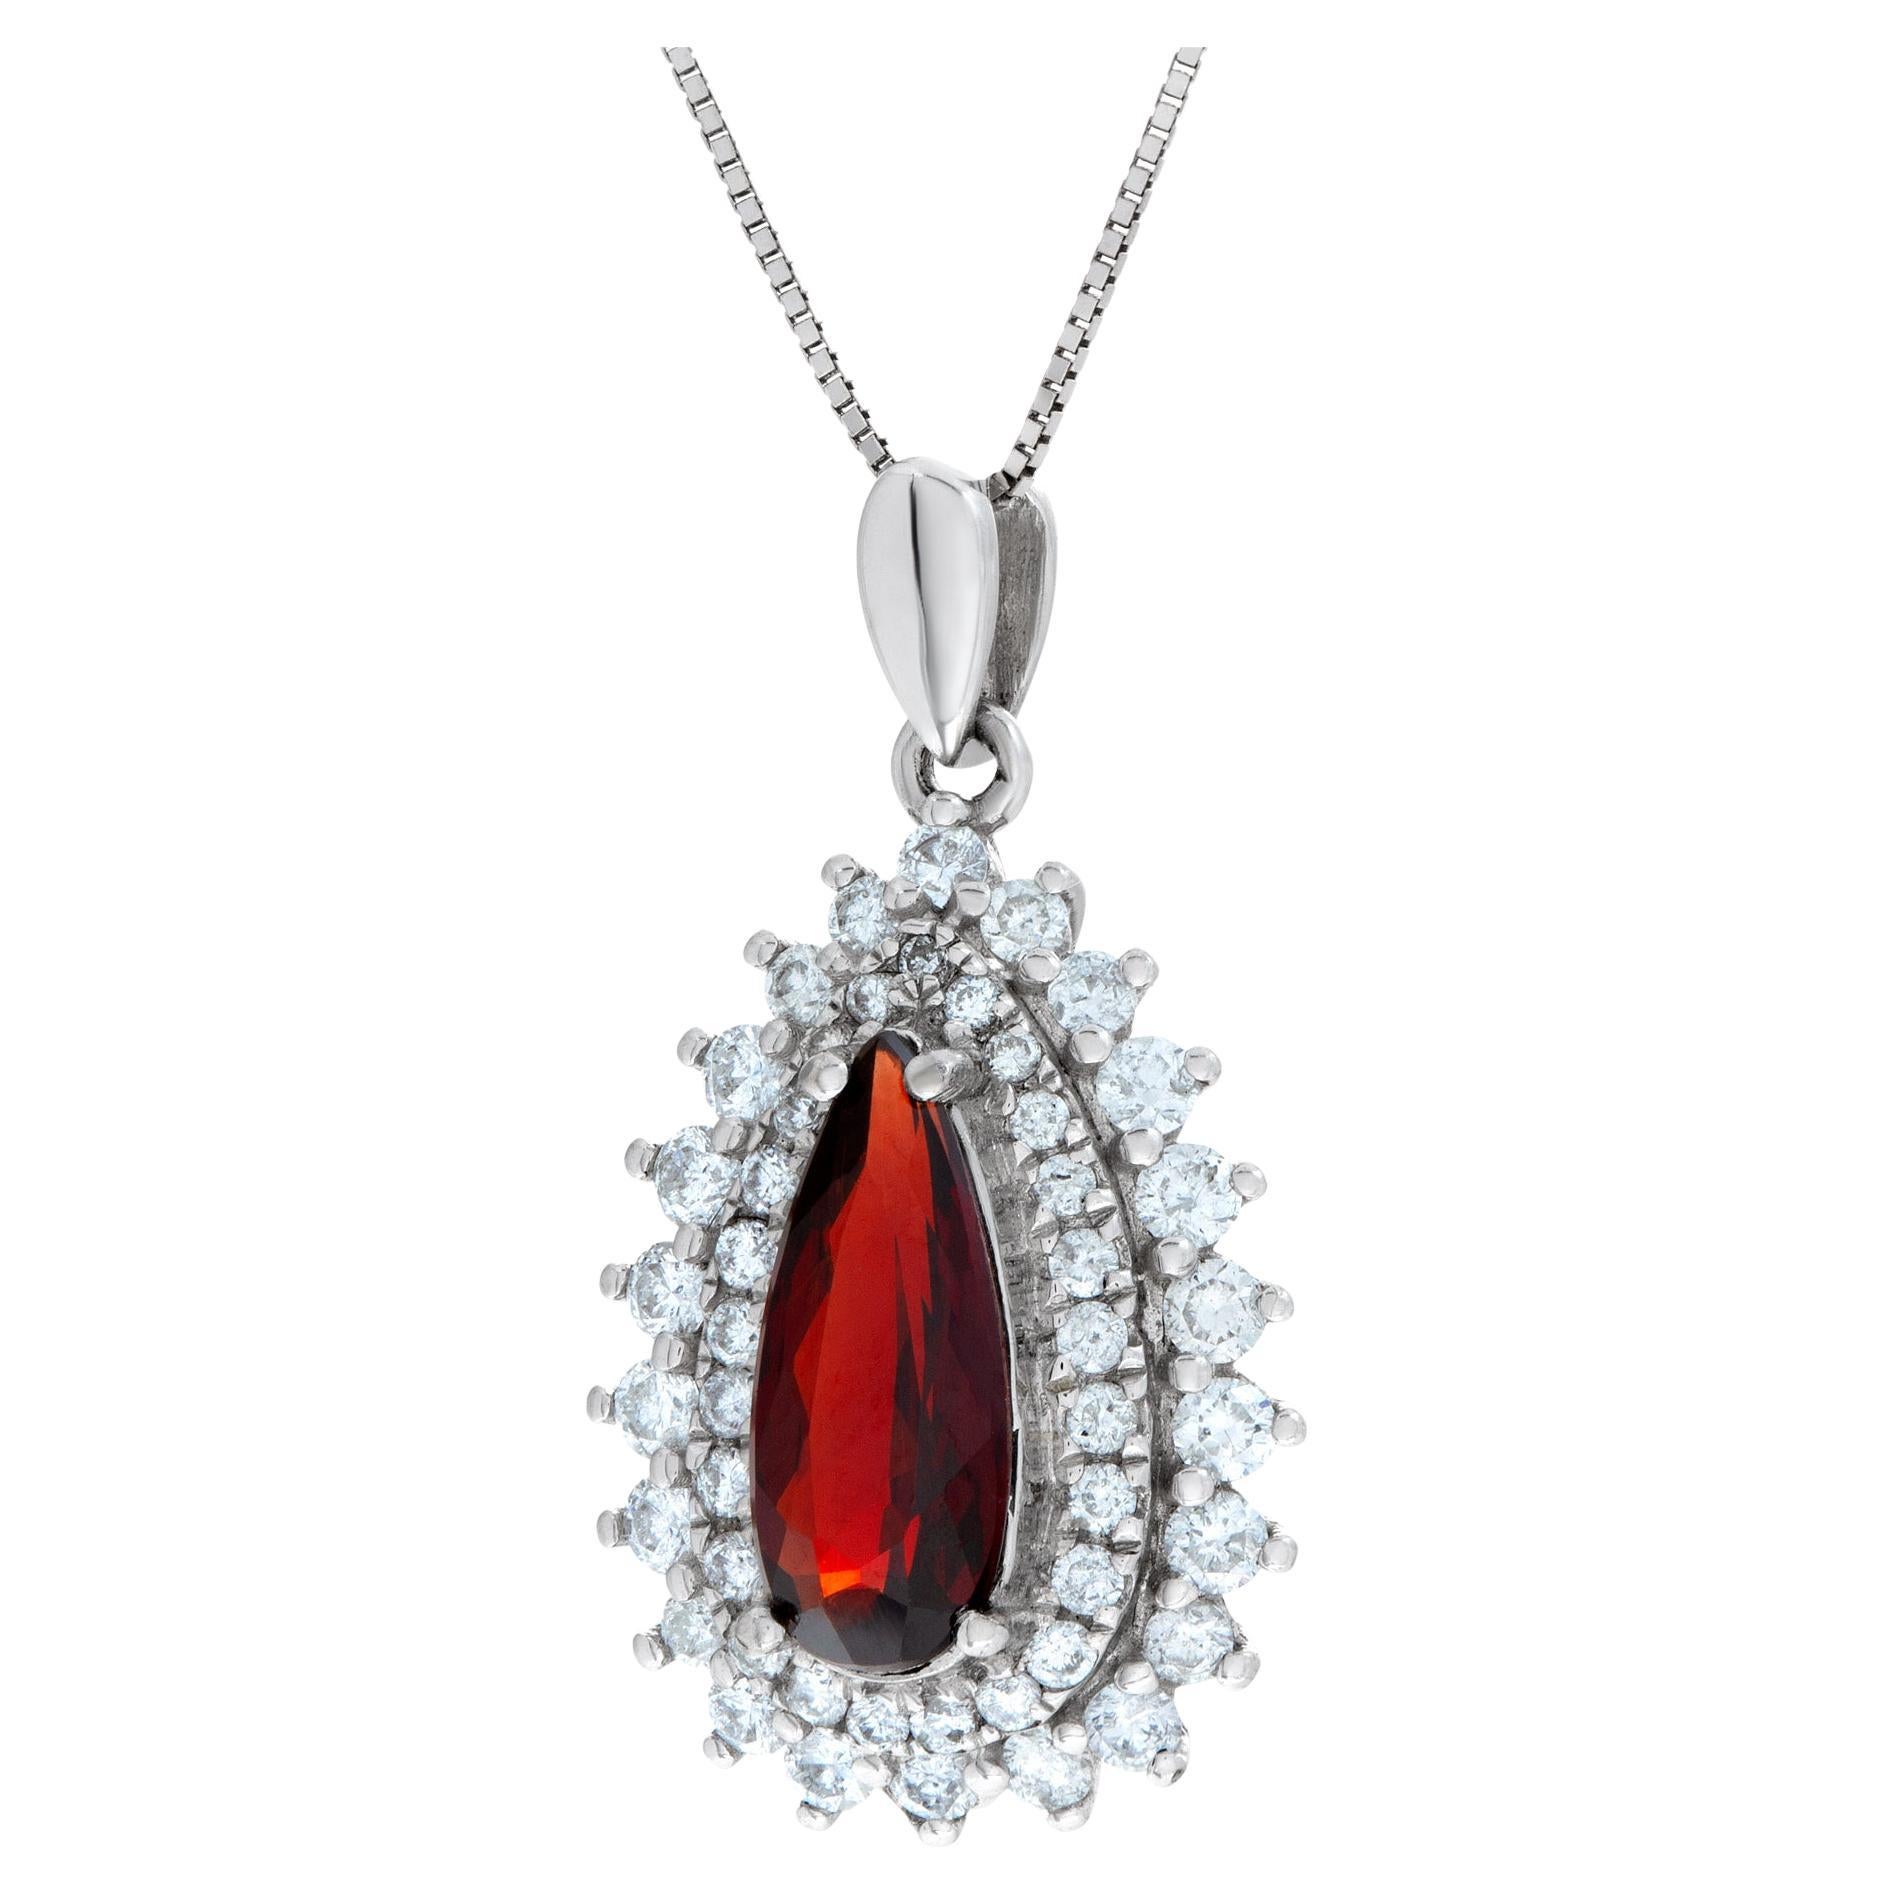 Pear shape Garnet pendant surrounded by diamonds set in 18K white gold, w/ 16"  For Sale